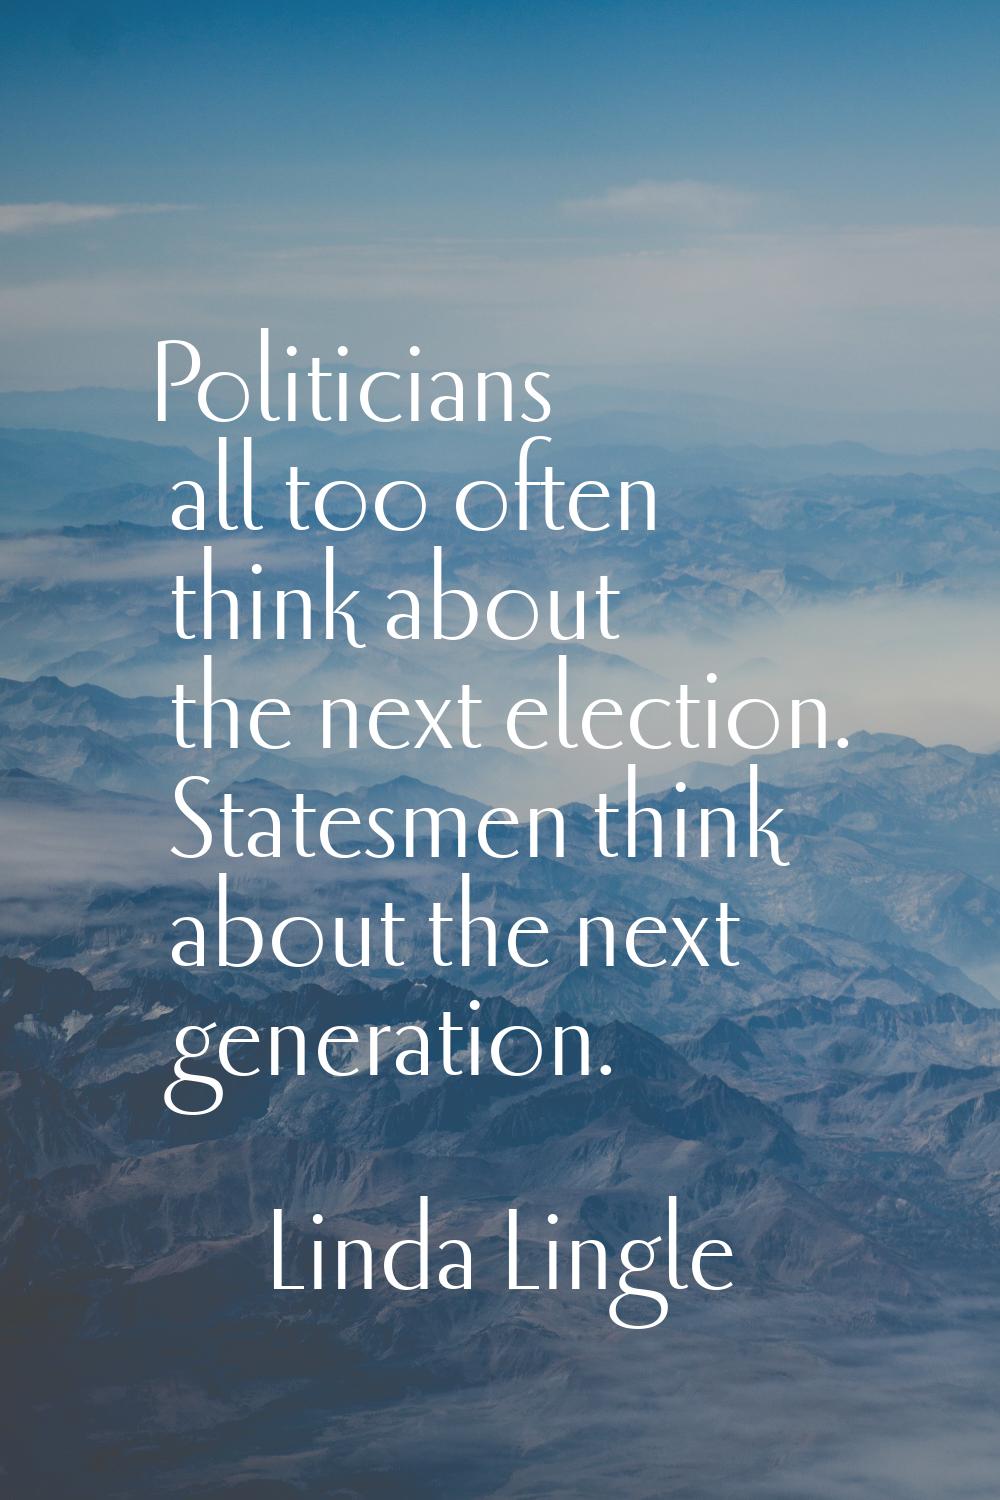 Politicians all too often think about the next election. Statesmen think about the next generation.